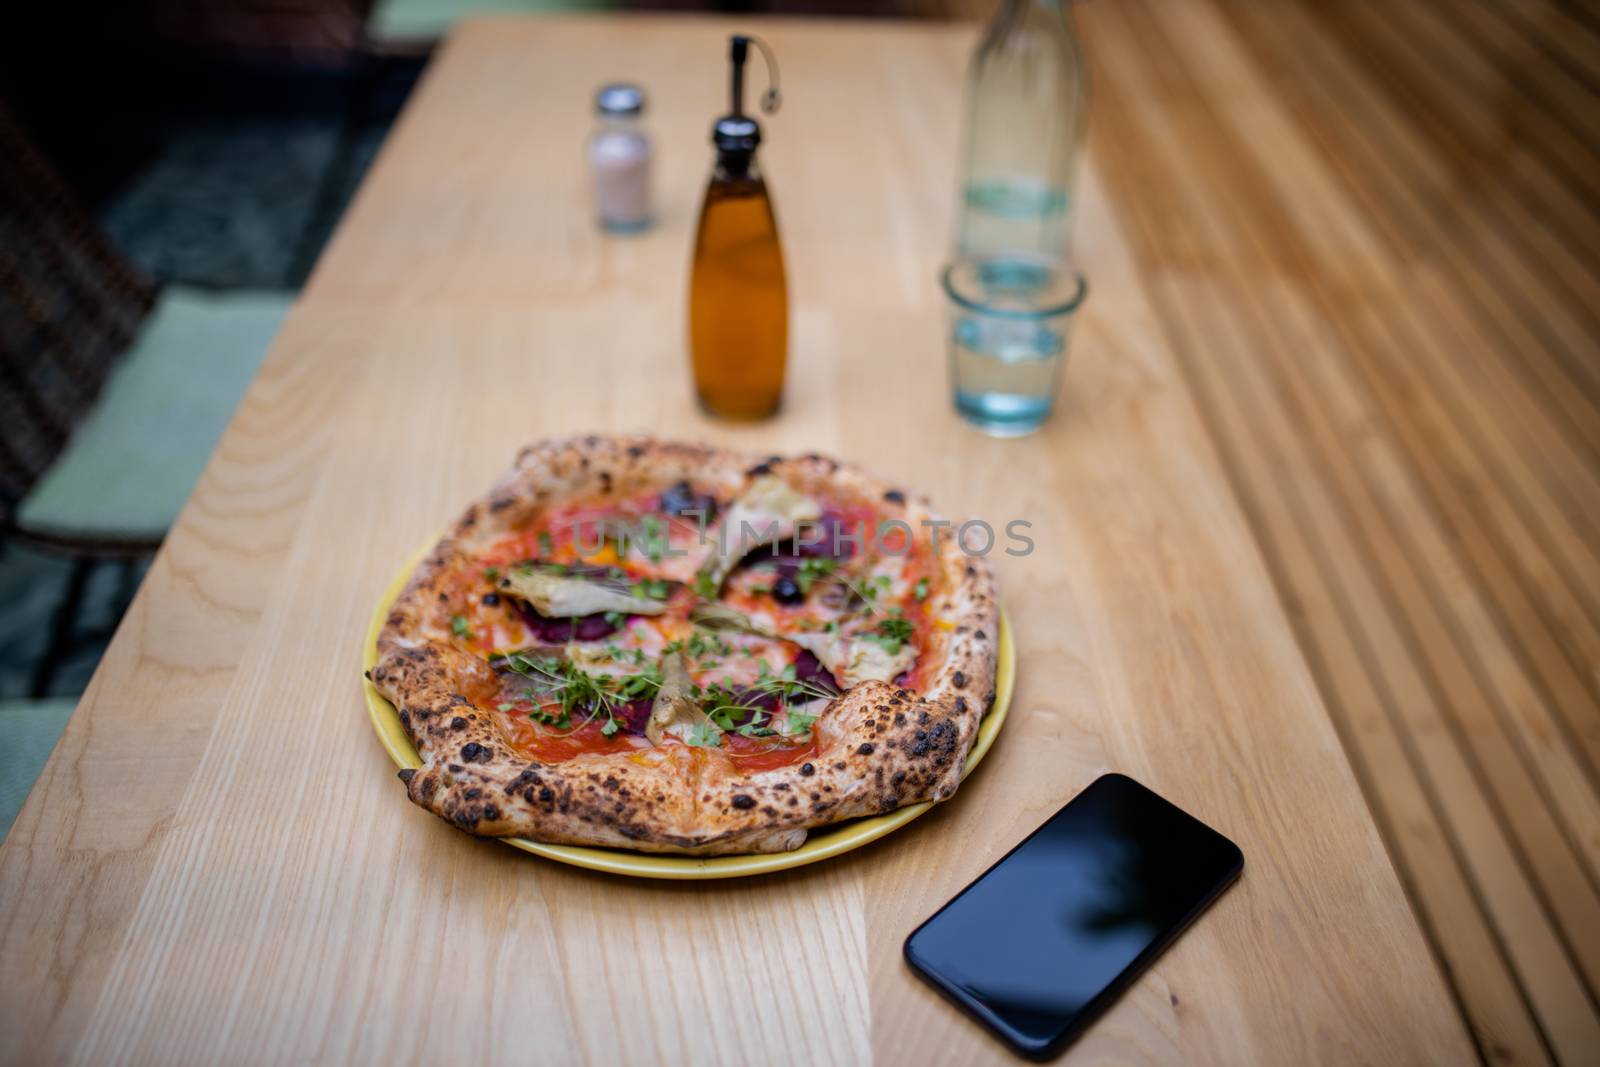 Picture of a tasty looking vegan pizza on a wooden table alongside a bottle of salad dressing, a smartphone, and a blurry glass of mineral water